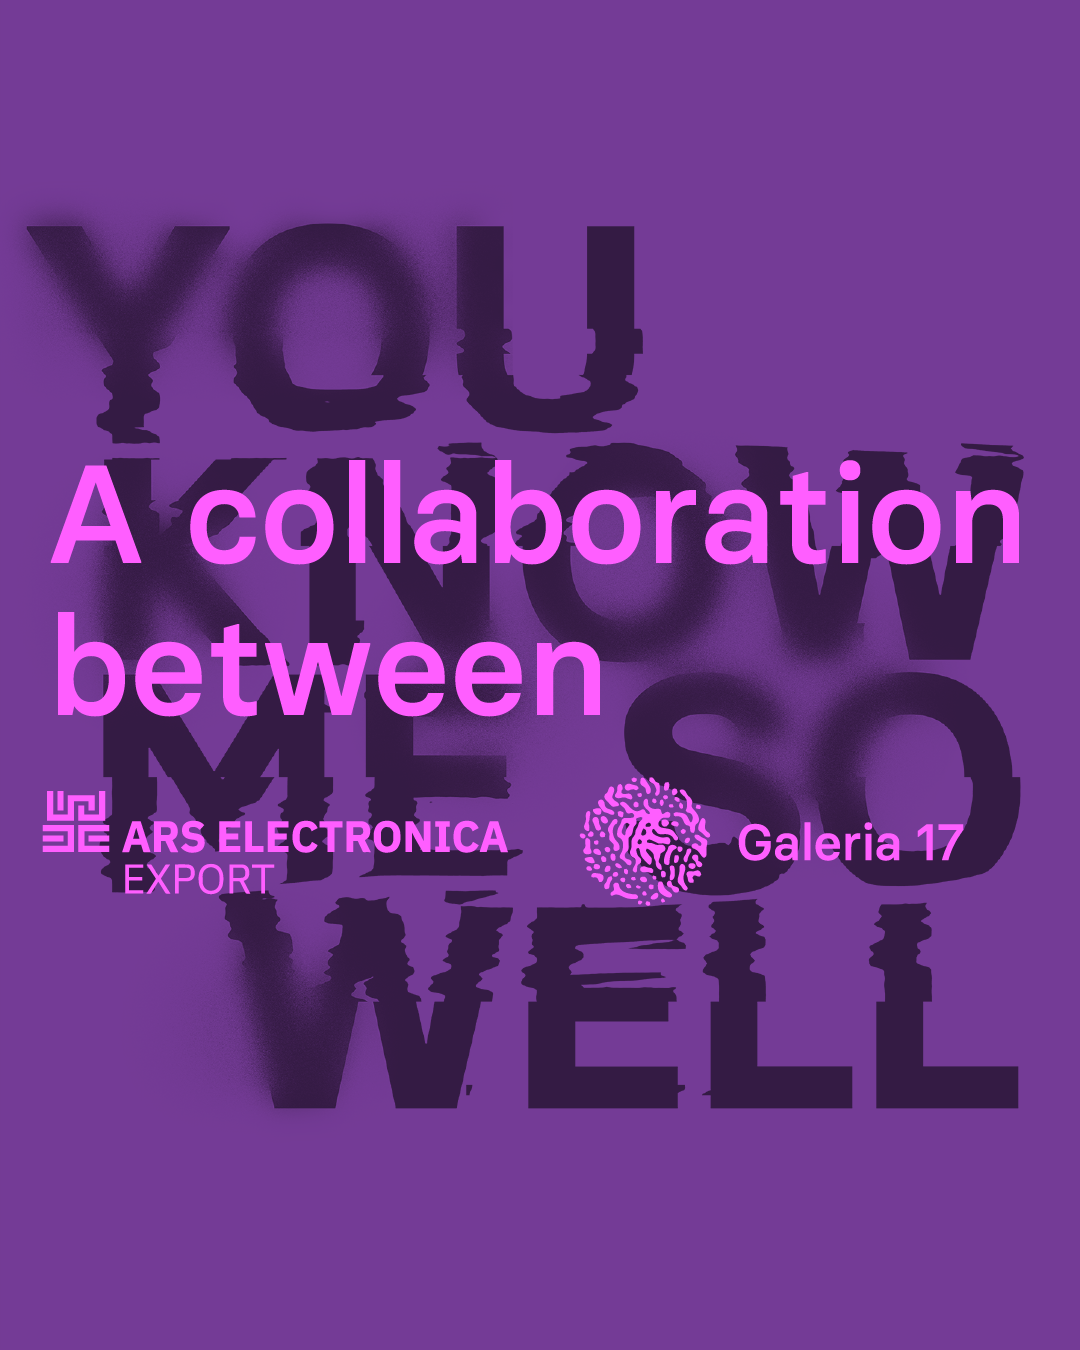 you know me so well – a collaboration between Shtatëmbëdhjetë and Ars Electronica